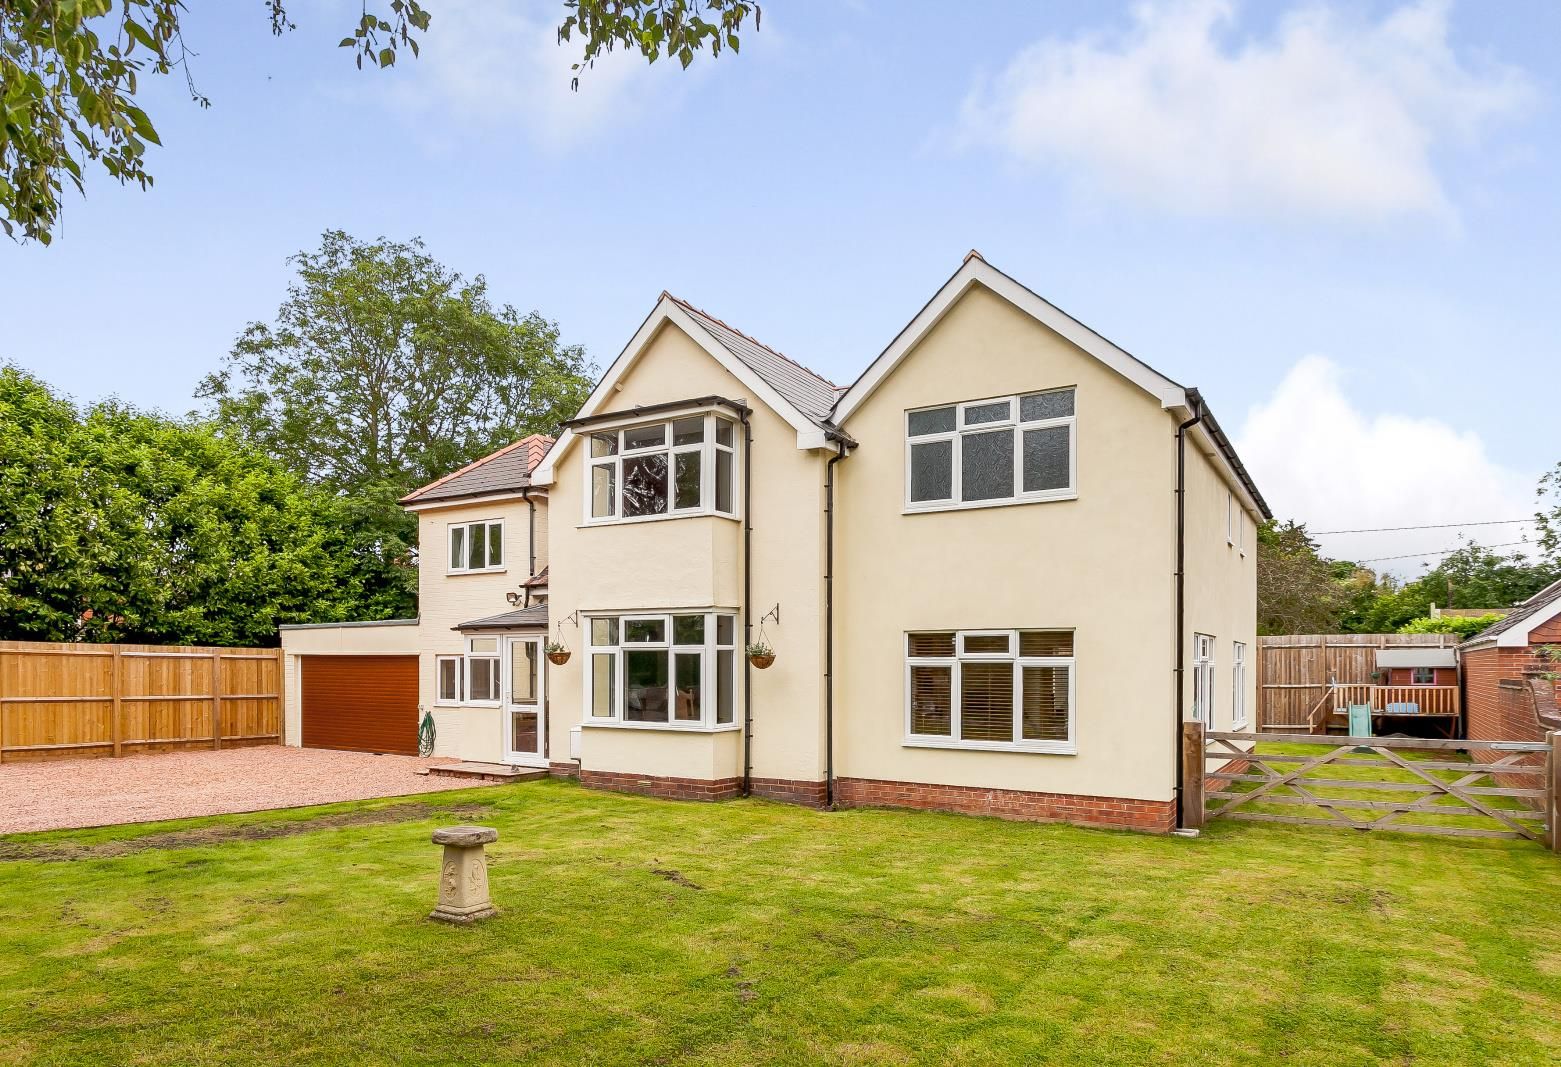 4 bed detached for sale in Kings Acre  - Property Image 1